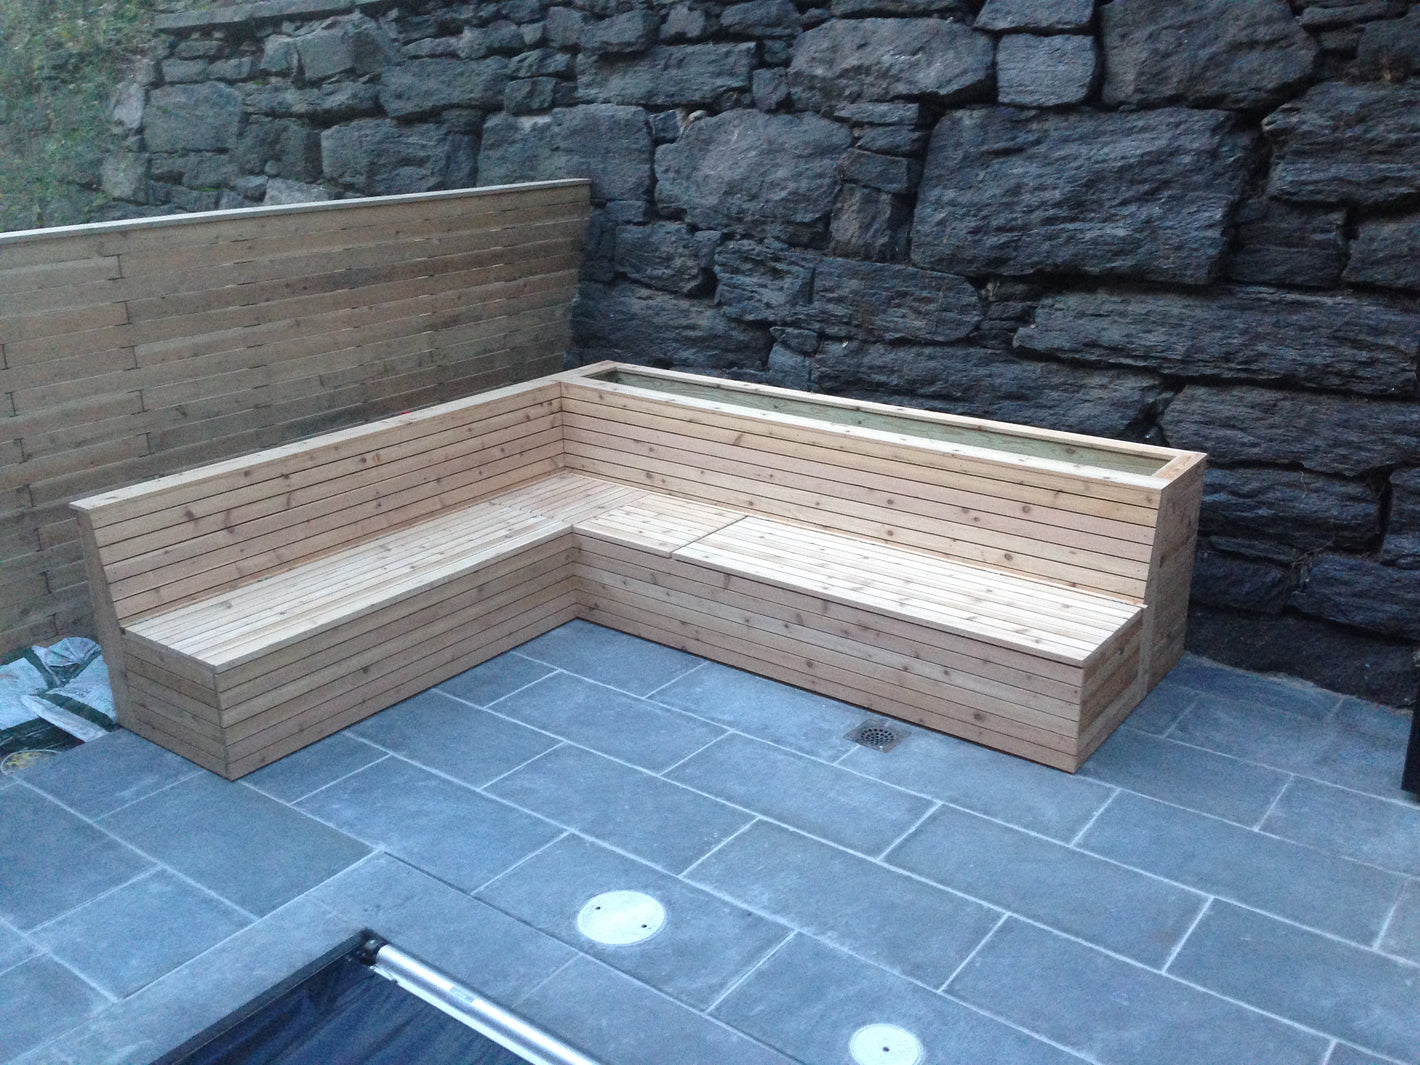 Custom outdoor knotty cedar bench with planter box and bluestone deck created by TCSC